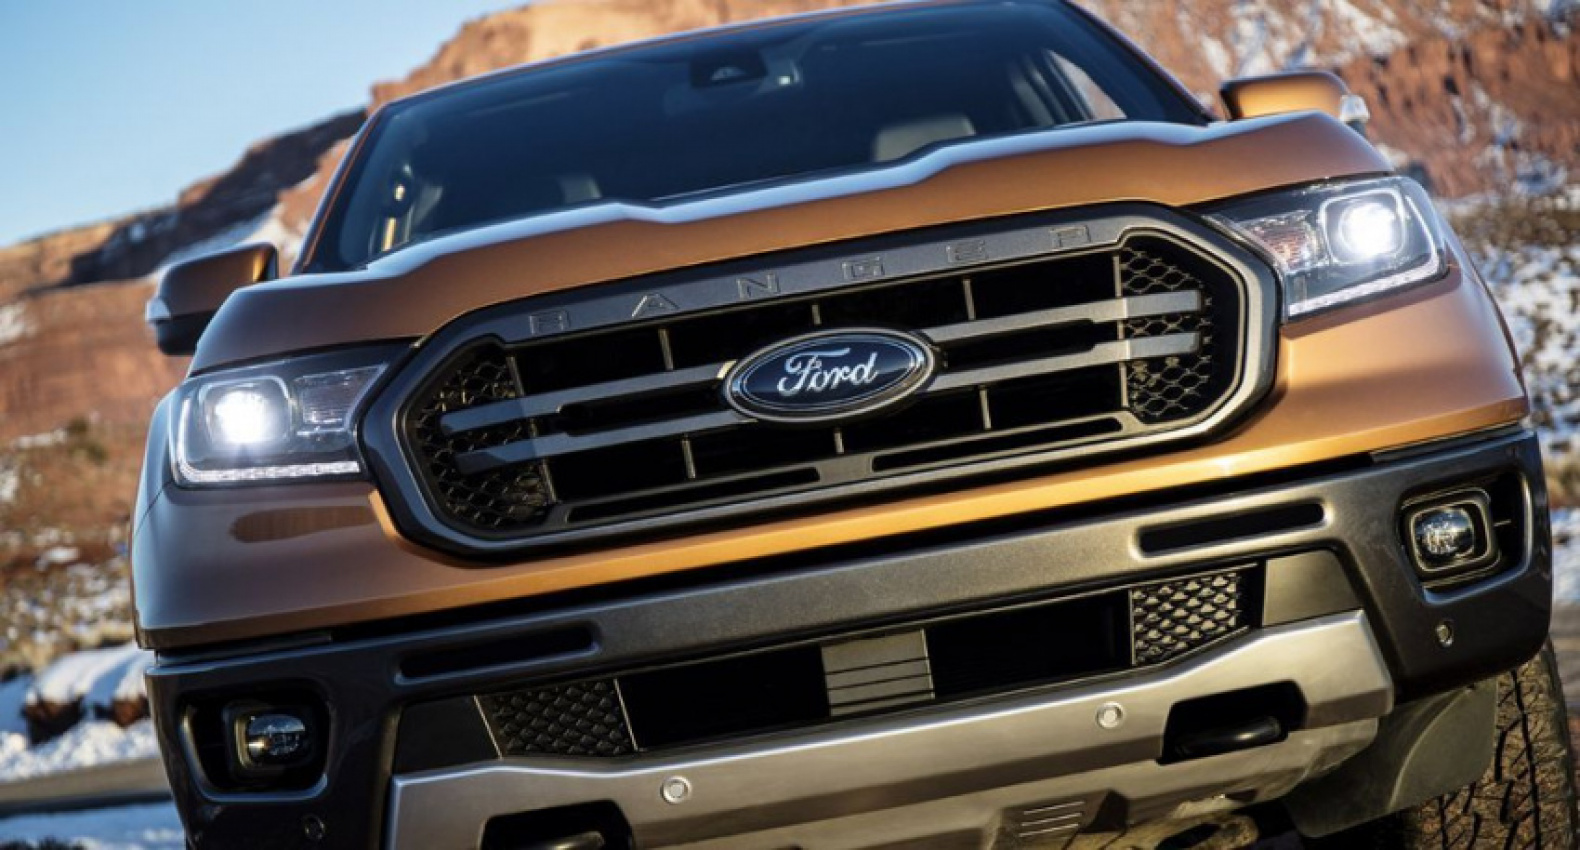 autos, cars, ford, android, auto news, detroit, detroit 2018, ford ranger, ranger, android, detroit 2018: ford ranger returns to the us after 6 years hiatus